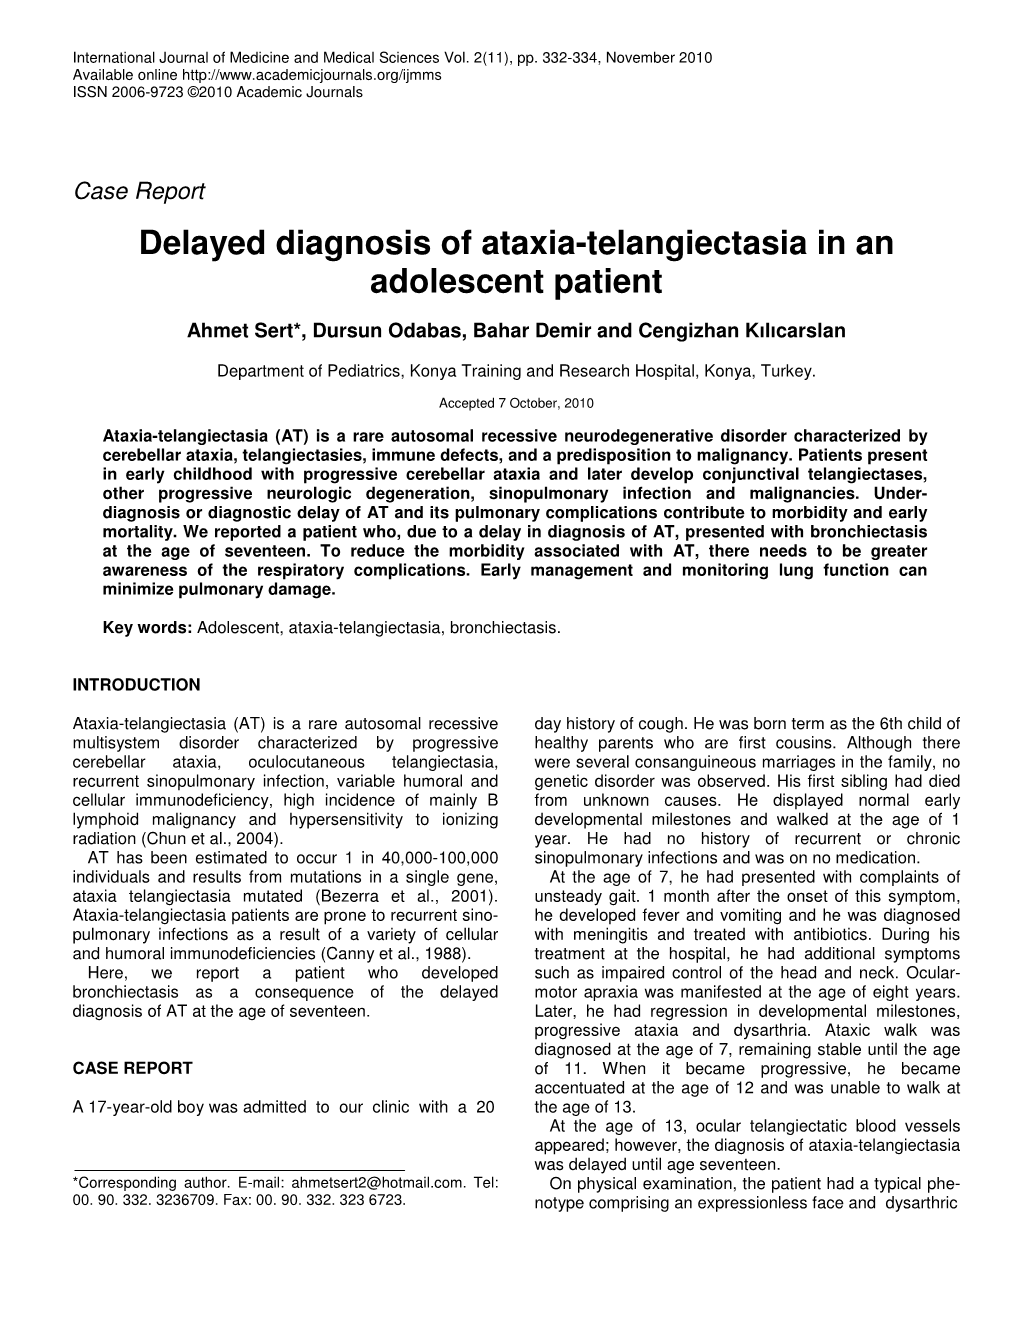 Delayed Diagnosis of Ataxia-Telangiectasia in an Adolescent Patient